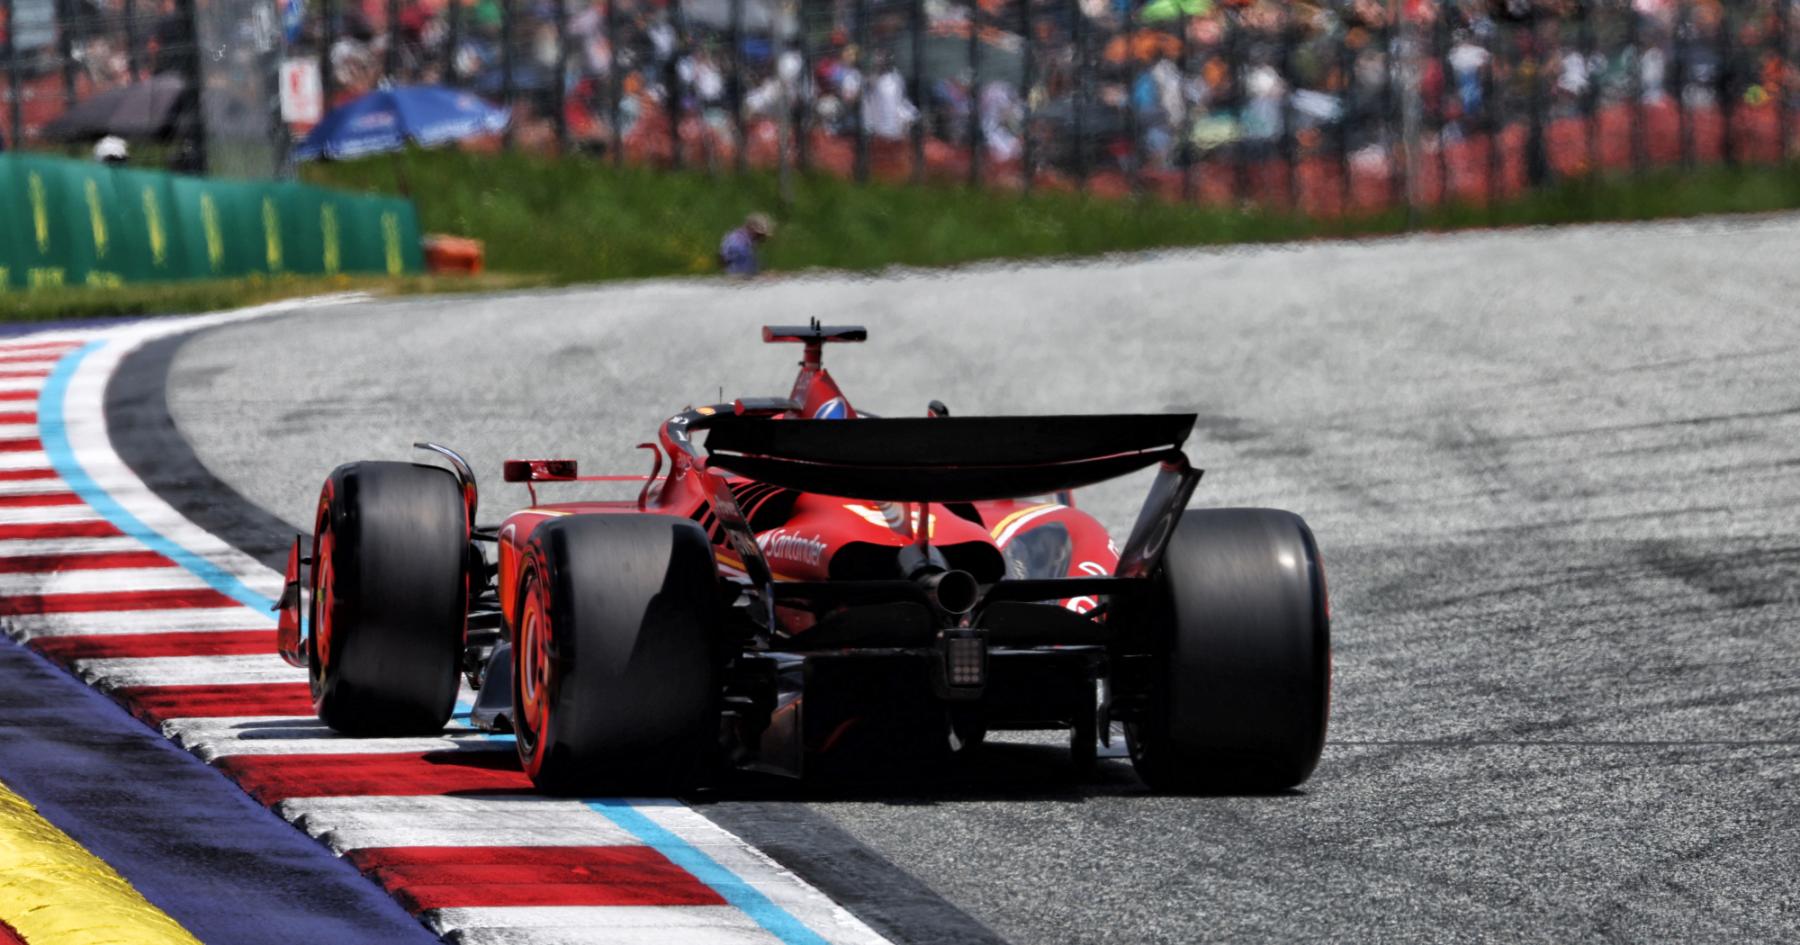 Pole Position Drama: Leclerc's Masterful Response to Sprint Qualifying Controversy